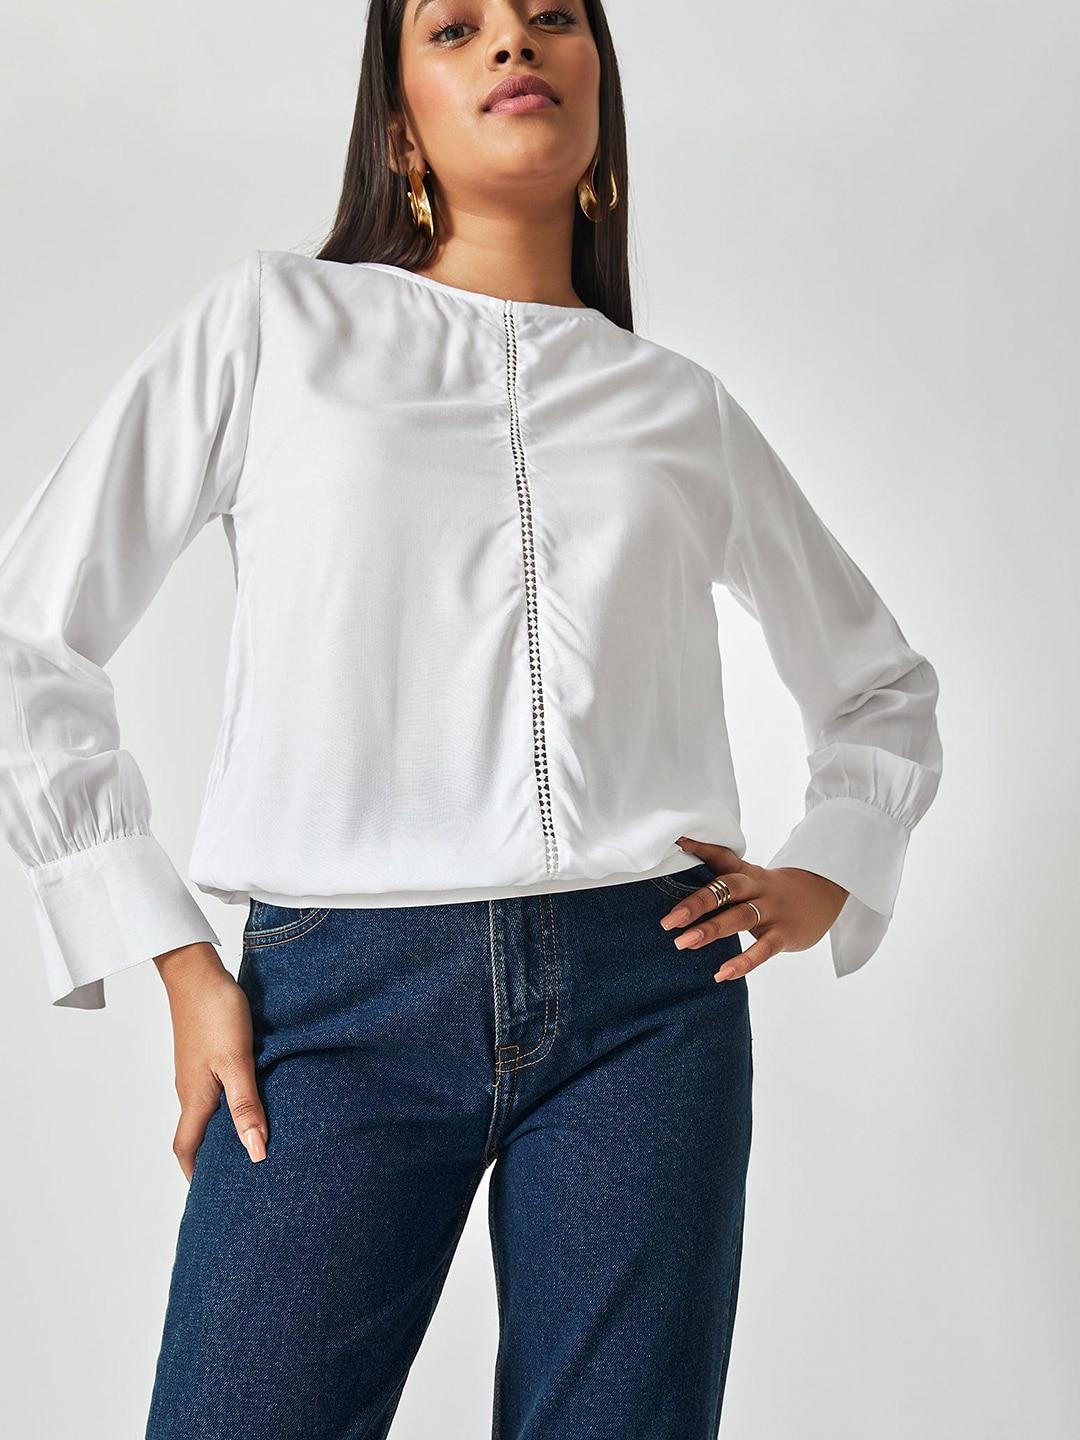 the-label-life-white-lace-detail-cuffed-sleeves-top